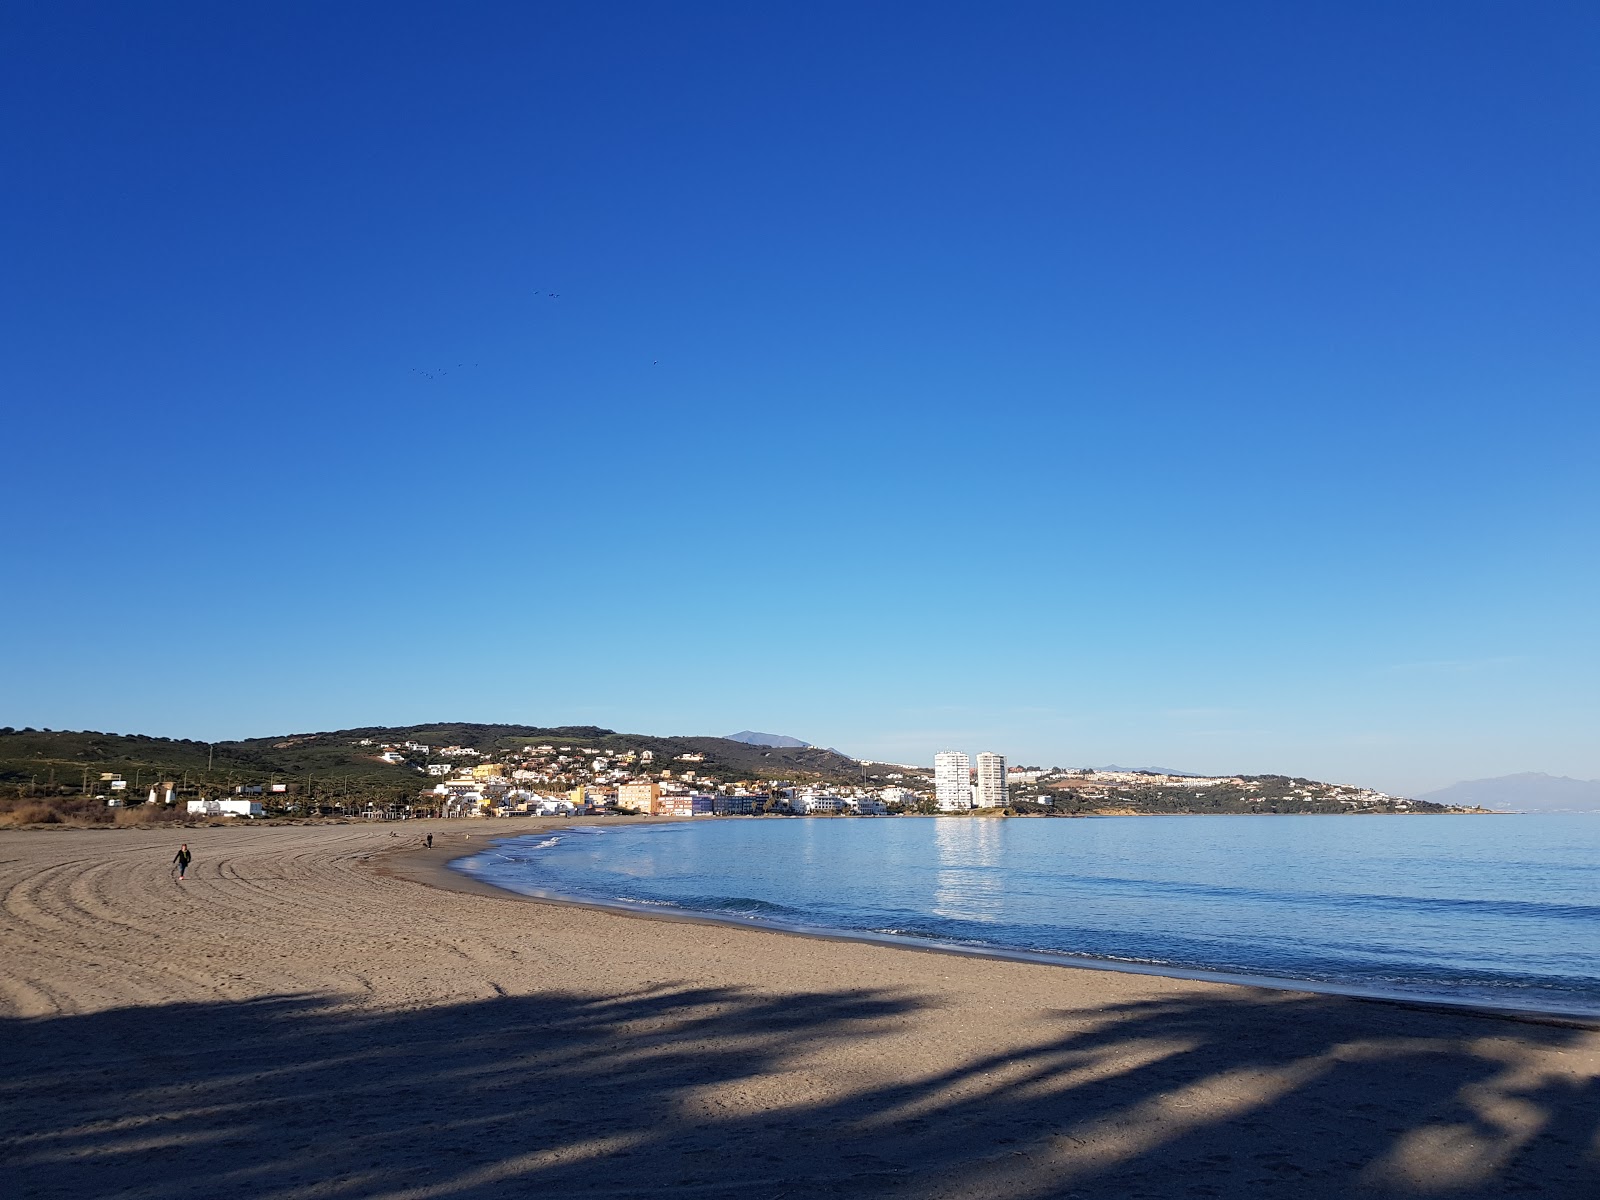 Photo of Playa de Torreguadiaro with gray sand surface